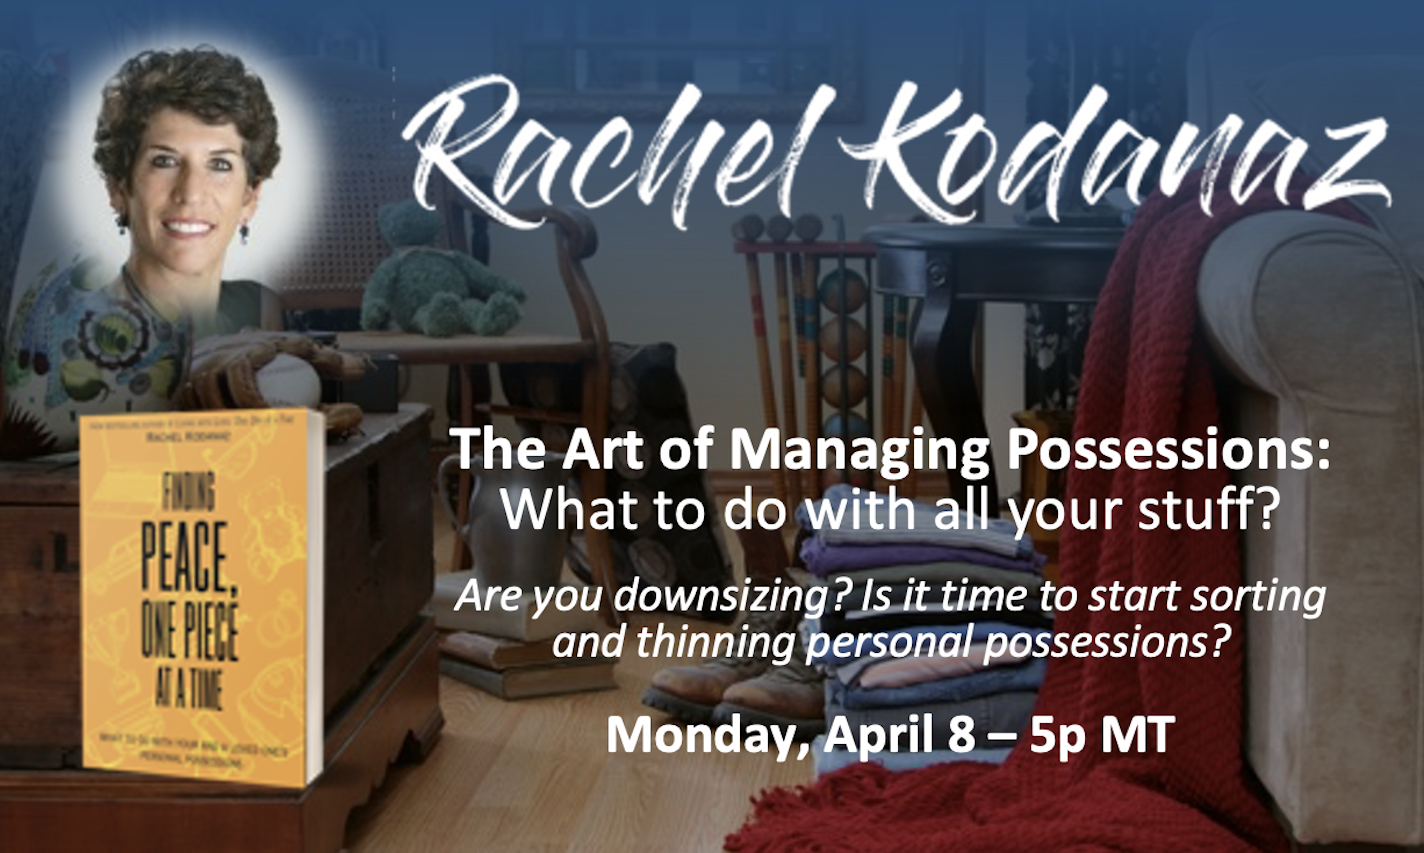 Art of Managing Possessions: What to do with all your stuff?